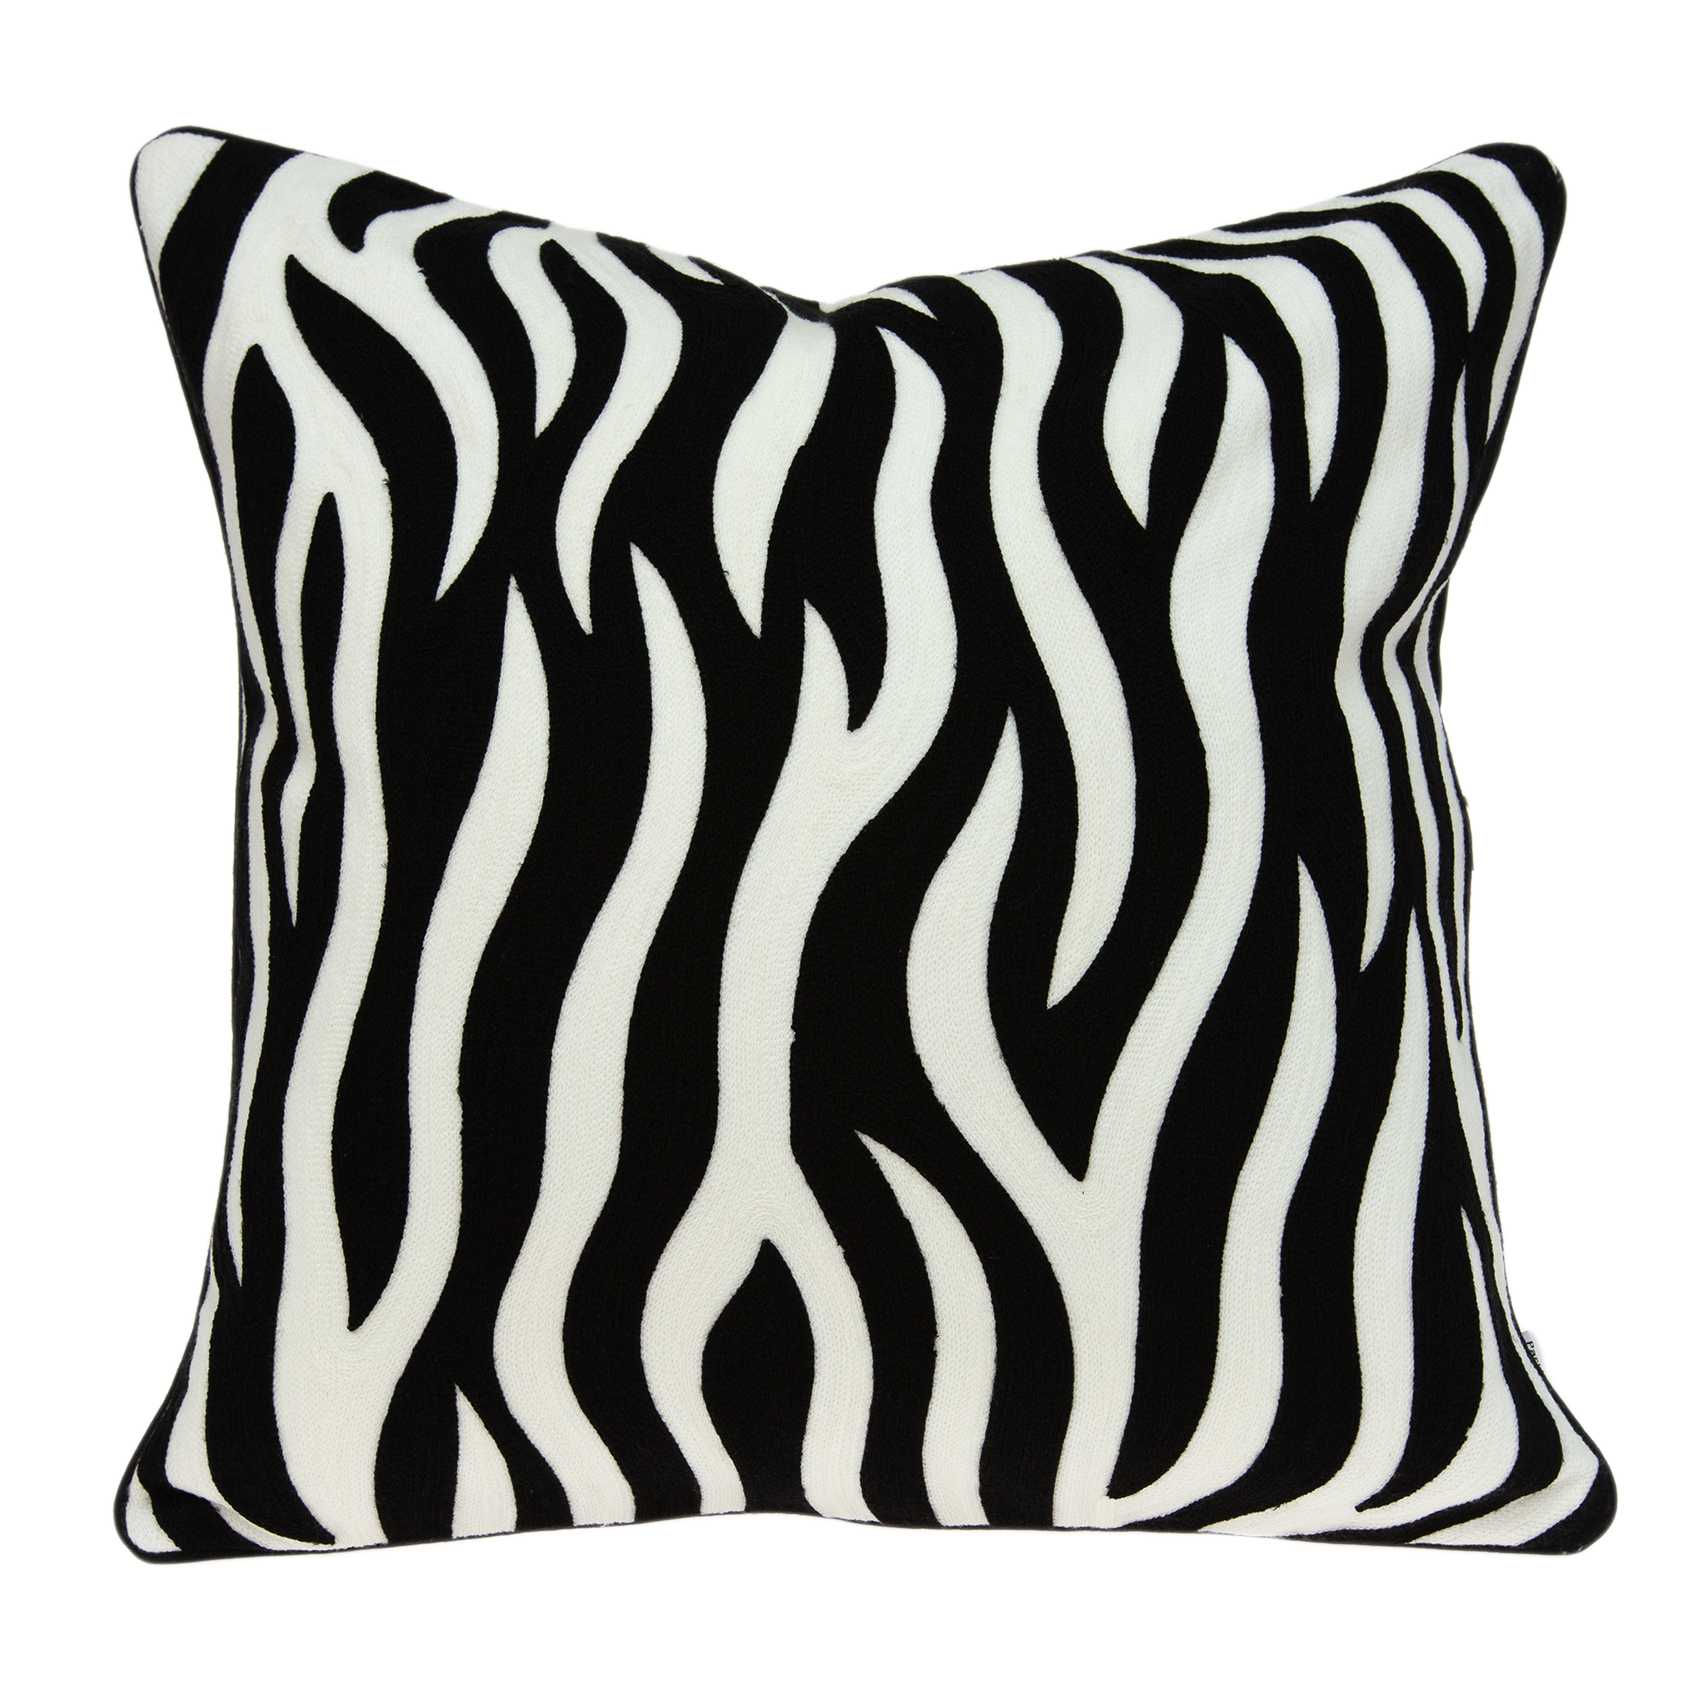 20" x 0.5" x 20" Transitional Black and White Zebra Pillow Cover